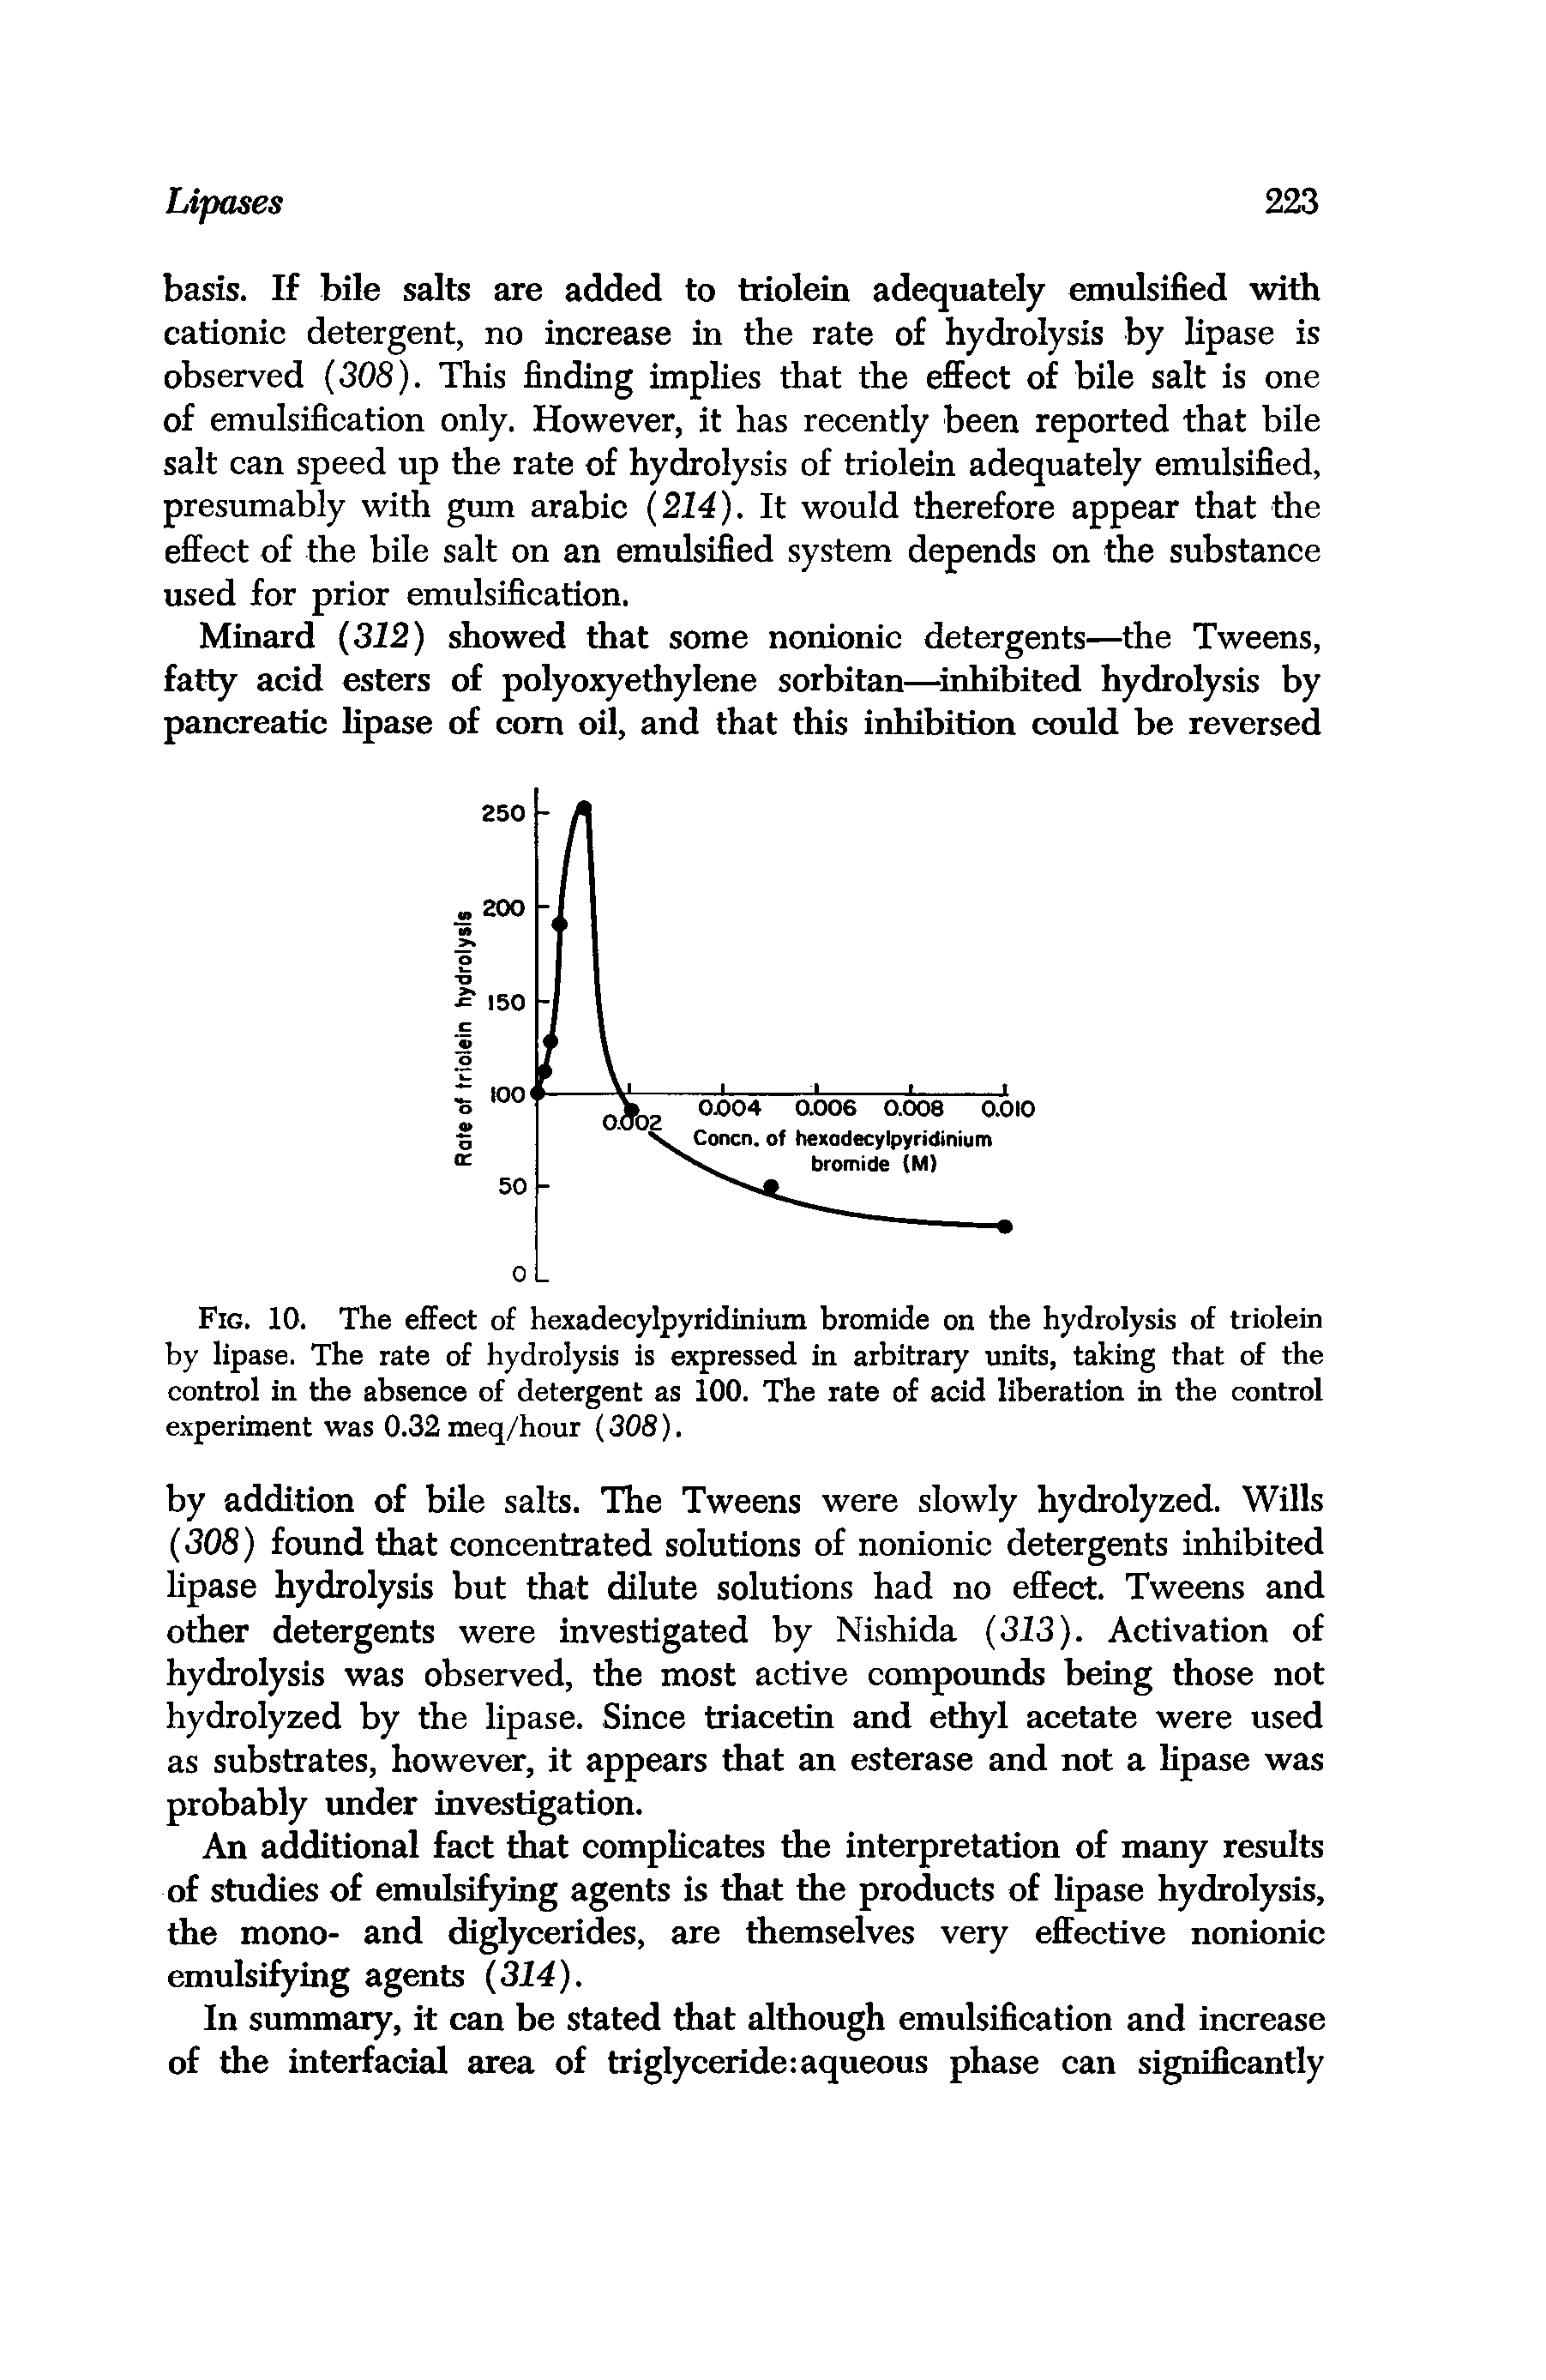 Fig. 10. The effect of hexadecylpyridinium bromide on the hydrolysis of triolein by lipase. The rate of hydrolysis is expressed in arbitrary units, taking that of the control in the absence of detergent as 100. The rate of acid liberation in the control experiment was 0.32meq/hour (308).